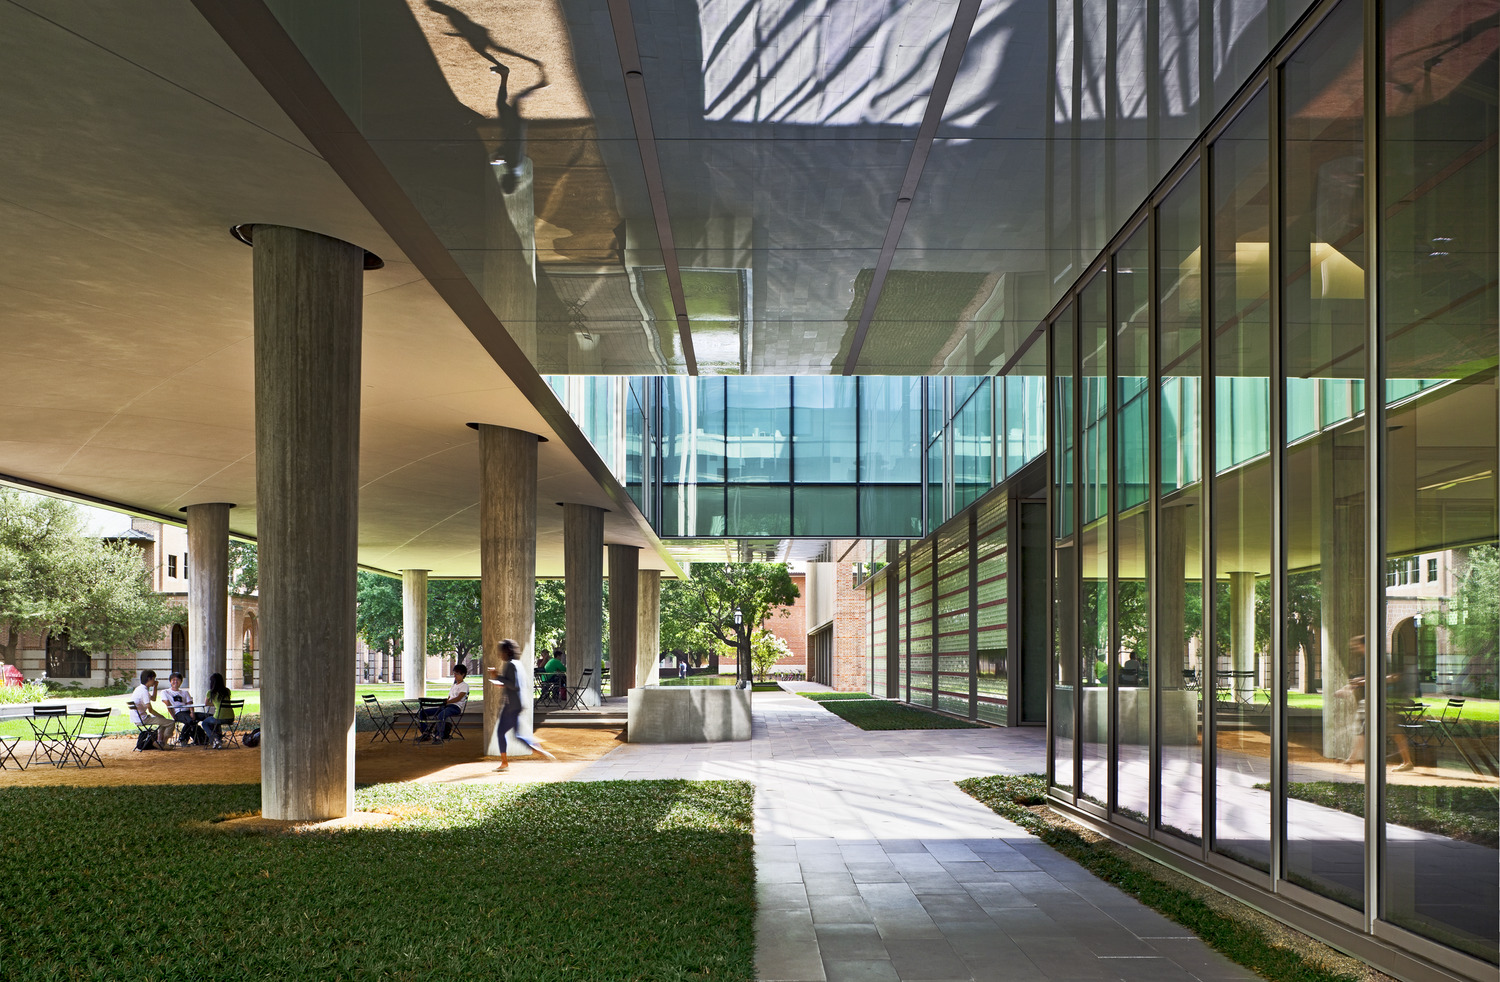 <p>Several outdoor seating areas and a water feature encourage Rice University students and faculty members to linger in the shade of the buildings, extending the use of outdoor space in a hot climate. | <small>&copy; Hester + Hardaway</small>&nbsp;<br /></p>